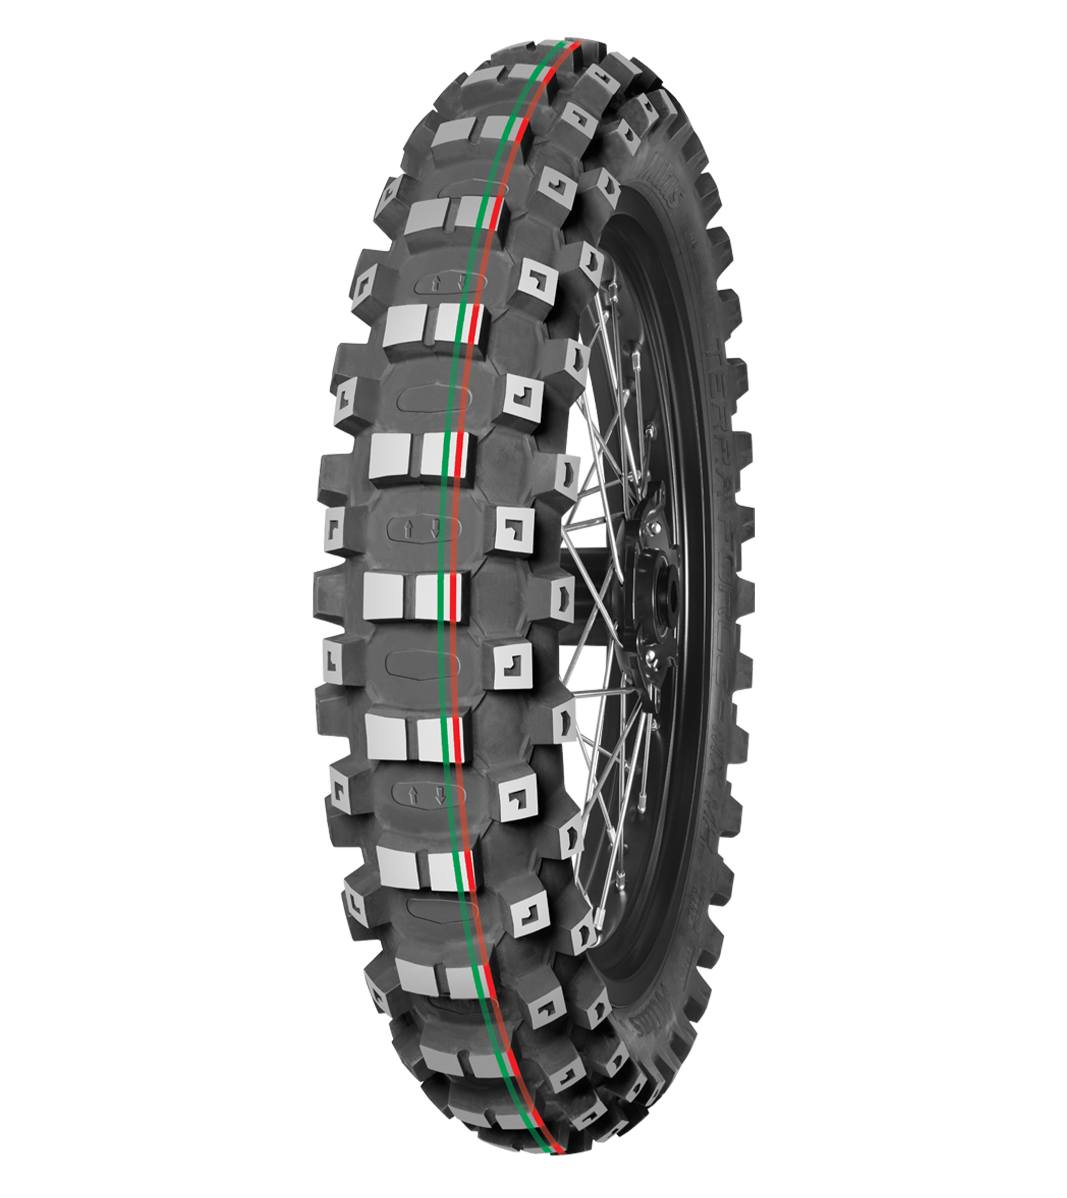 Mitas TERRA FORCE-MX MH 120/80-19 Motocross Competition Off-Road MEDIUM TO HARD 63M Red & Green Tube Rear Tire, 226516, 120/80-19, Motocross, Motocross Competition, Off-Road, Rear, Terra Force, Terra Force-MX MH, Trail, Tires - Imported and distributed in North & South America by Lindeco Genuine Powersports - Premier Powersports Equipment and Accessories for Motorcycle Enthusiasts, Professional Riders and Dealers.